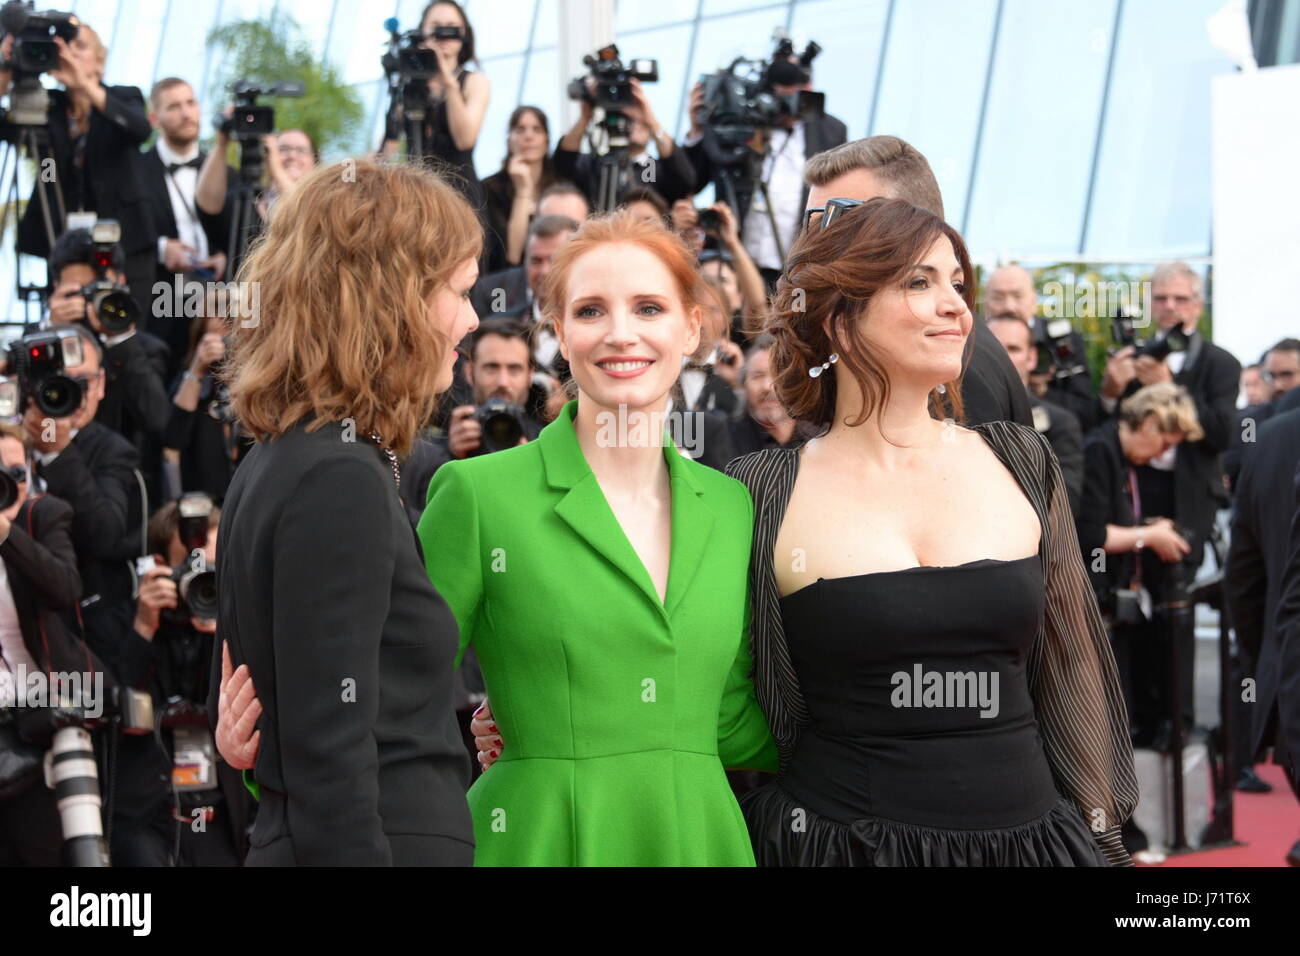 May 21, 2017 - Cannes, France - CANNES, FRANCE - MAY 21: Member of the Feature Film jury Agnes Jaoui, actress and member of the Feature Film jury Jessica Chastain and member of the Feature Film jury Maren Ade attend the 'The Meyerowitz Stories' screening during the 70th annual Cannes Film Festival at Palais des Festivals on May 21, 2017 in Cannes, France (Credit Image: © Frederick Injimbert via ZUMA Wire) Stock Photo